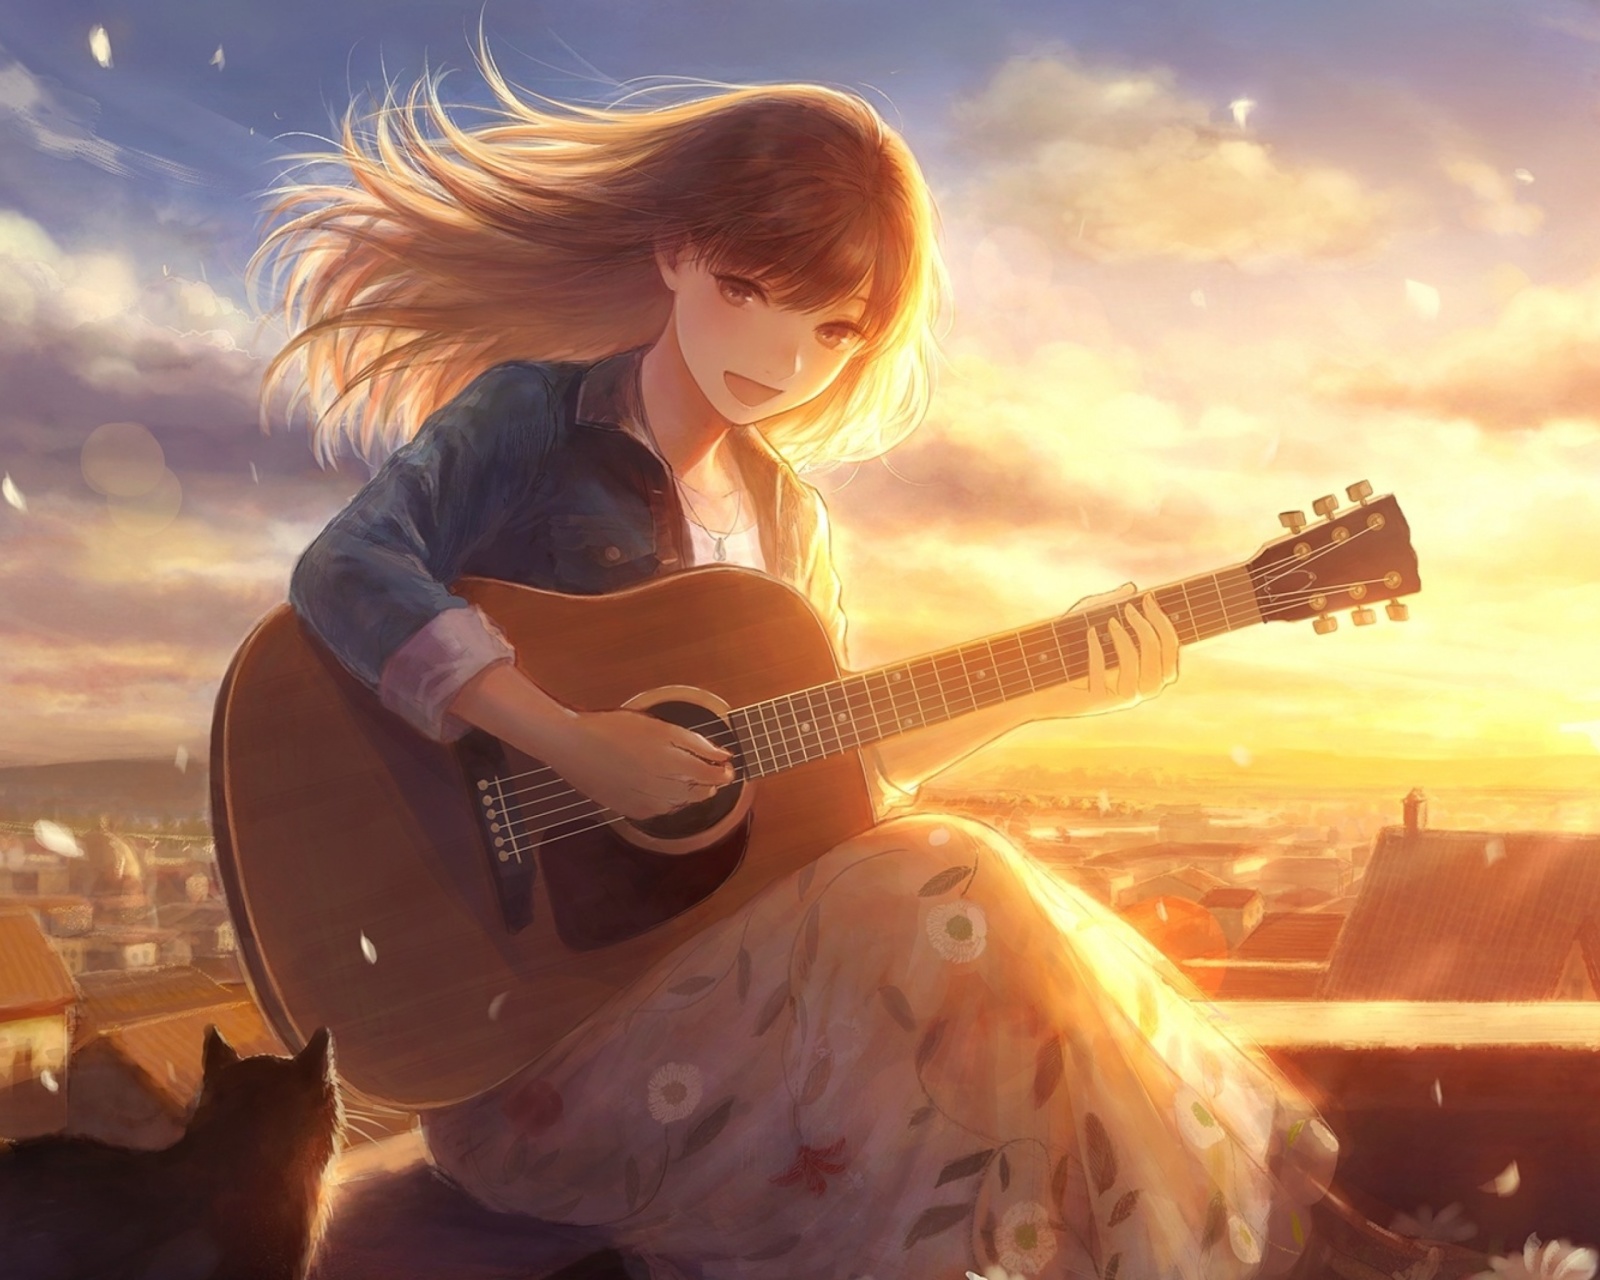 Anime Girl with Guitar wallpaper 1600x1280